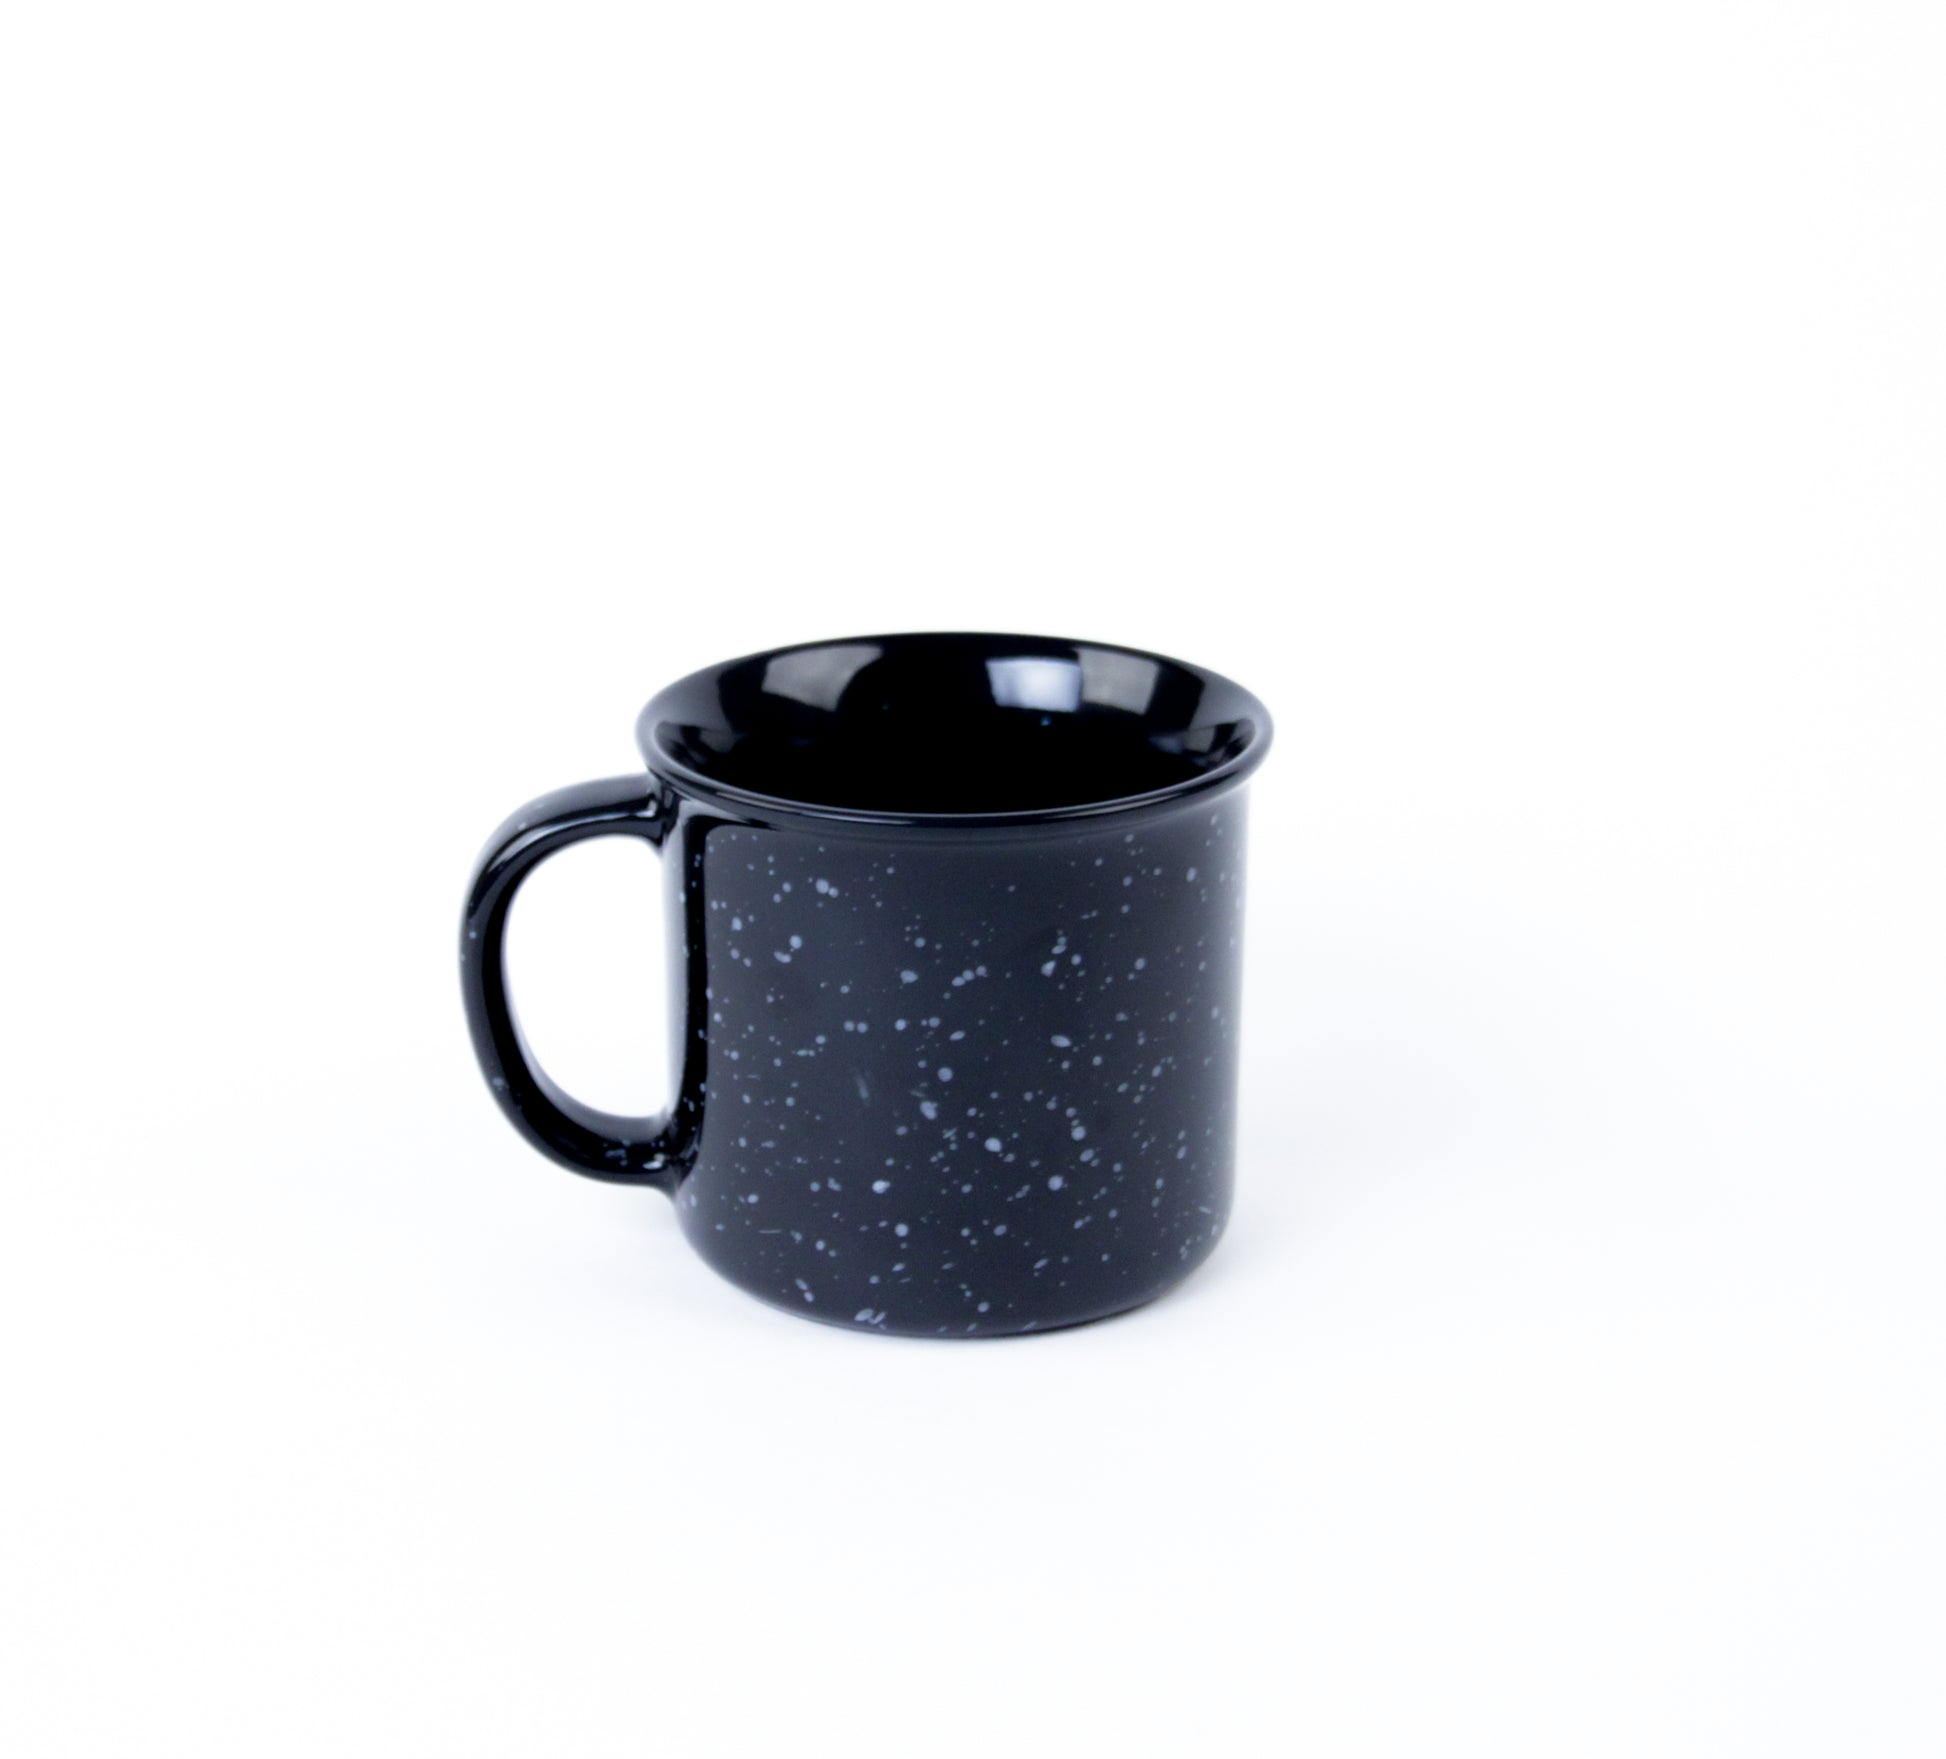 National Cowboy Museum black campfire mug ceramic coffee hot tea or soup cup drink in the morning like a cowboy ceramic glass 14 ounces back side view